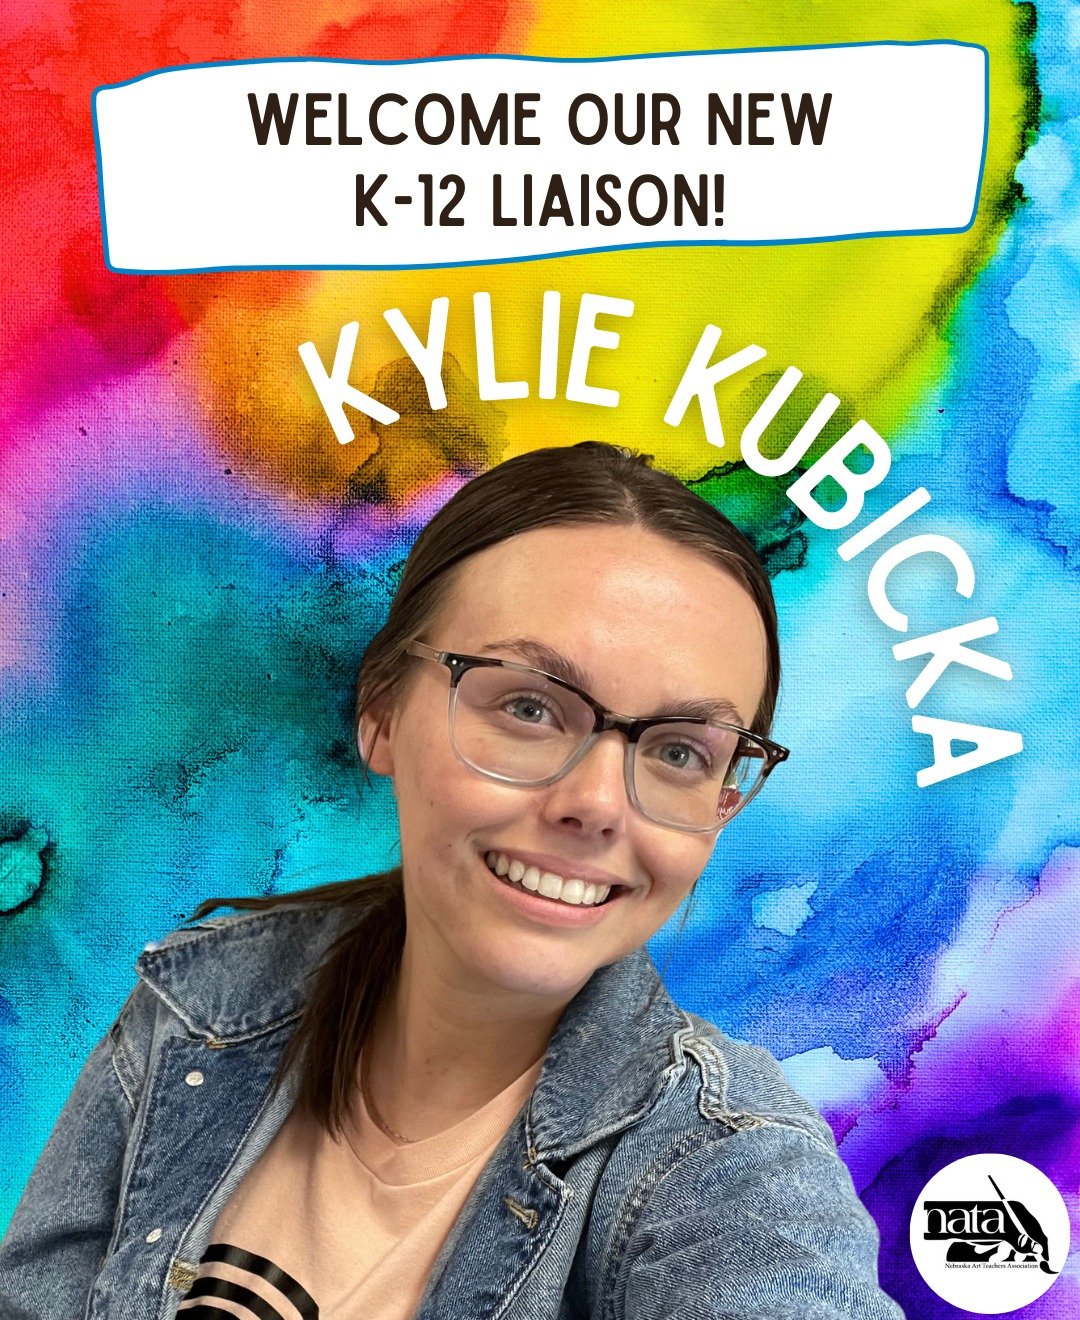 NATA has a new K-12 liaison! We welcome Kylie Kubicka of Kenesaw Public Schools as our newest liaison to the NATA sitting board. If you teach in a K-12 position, please contact Kylie with any needs or ideas to support learners through art education.
